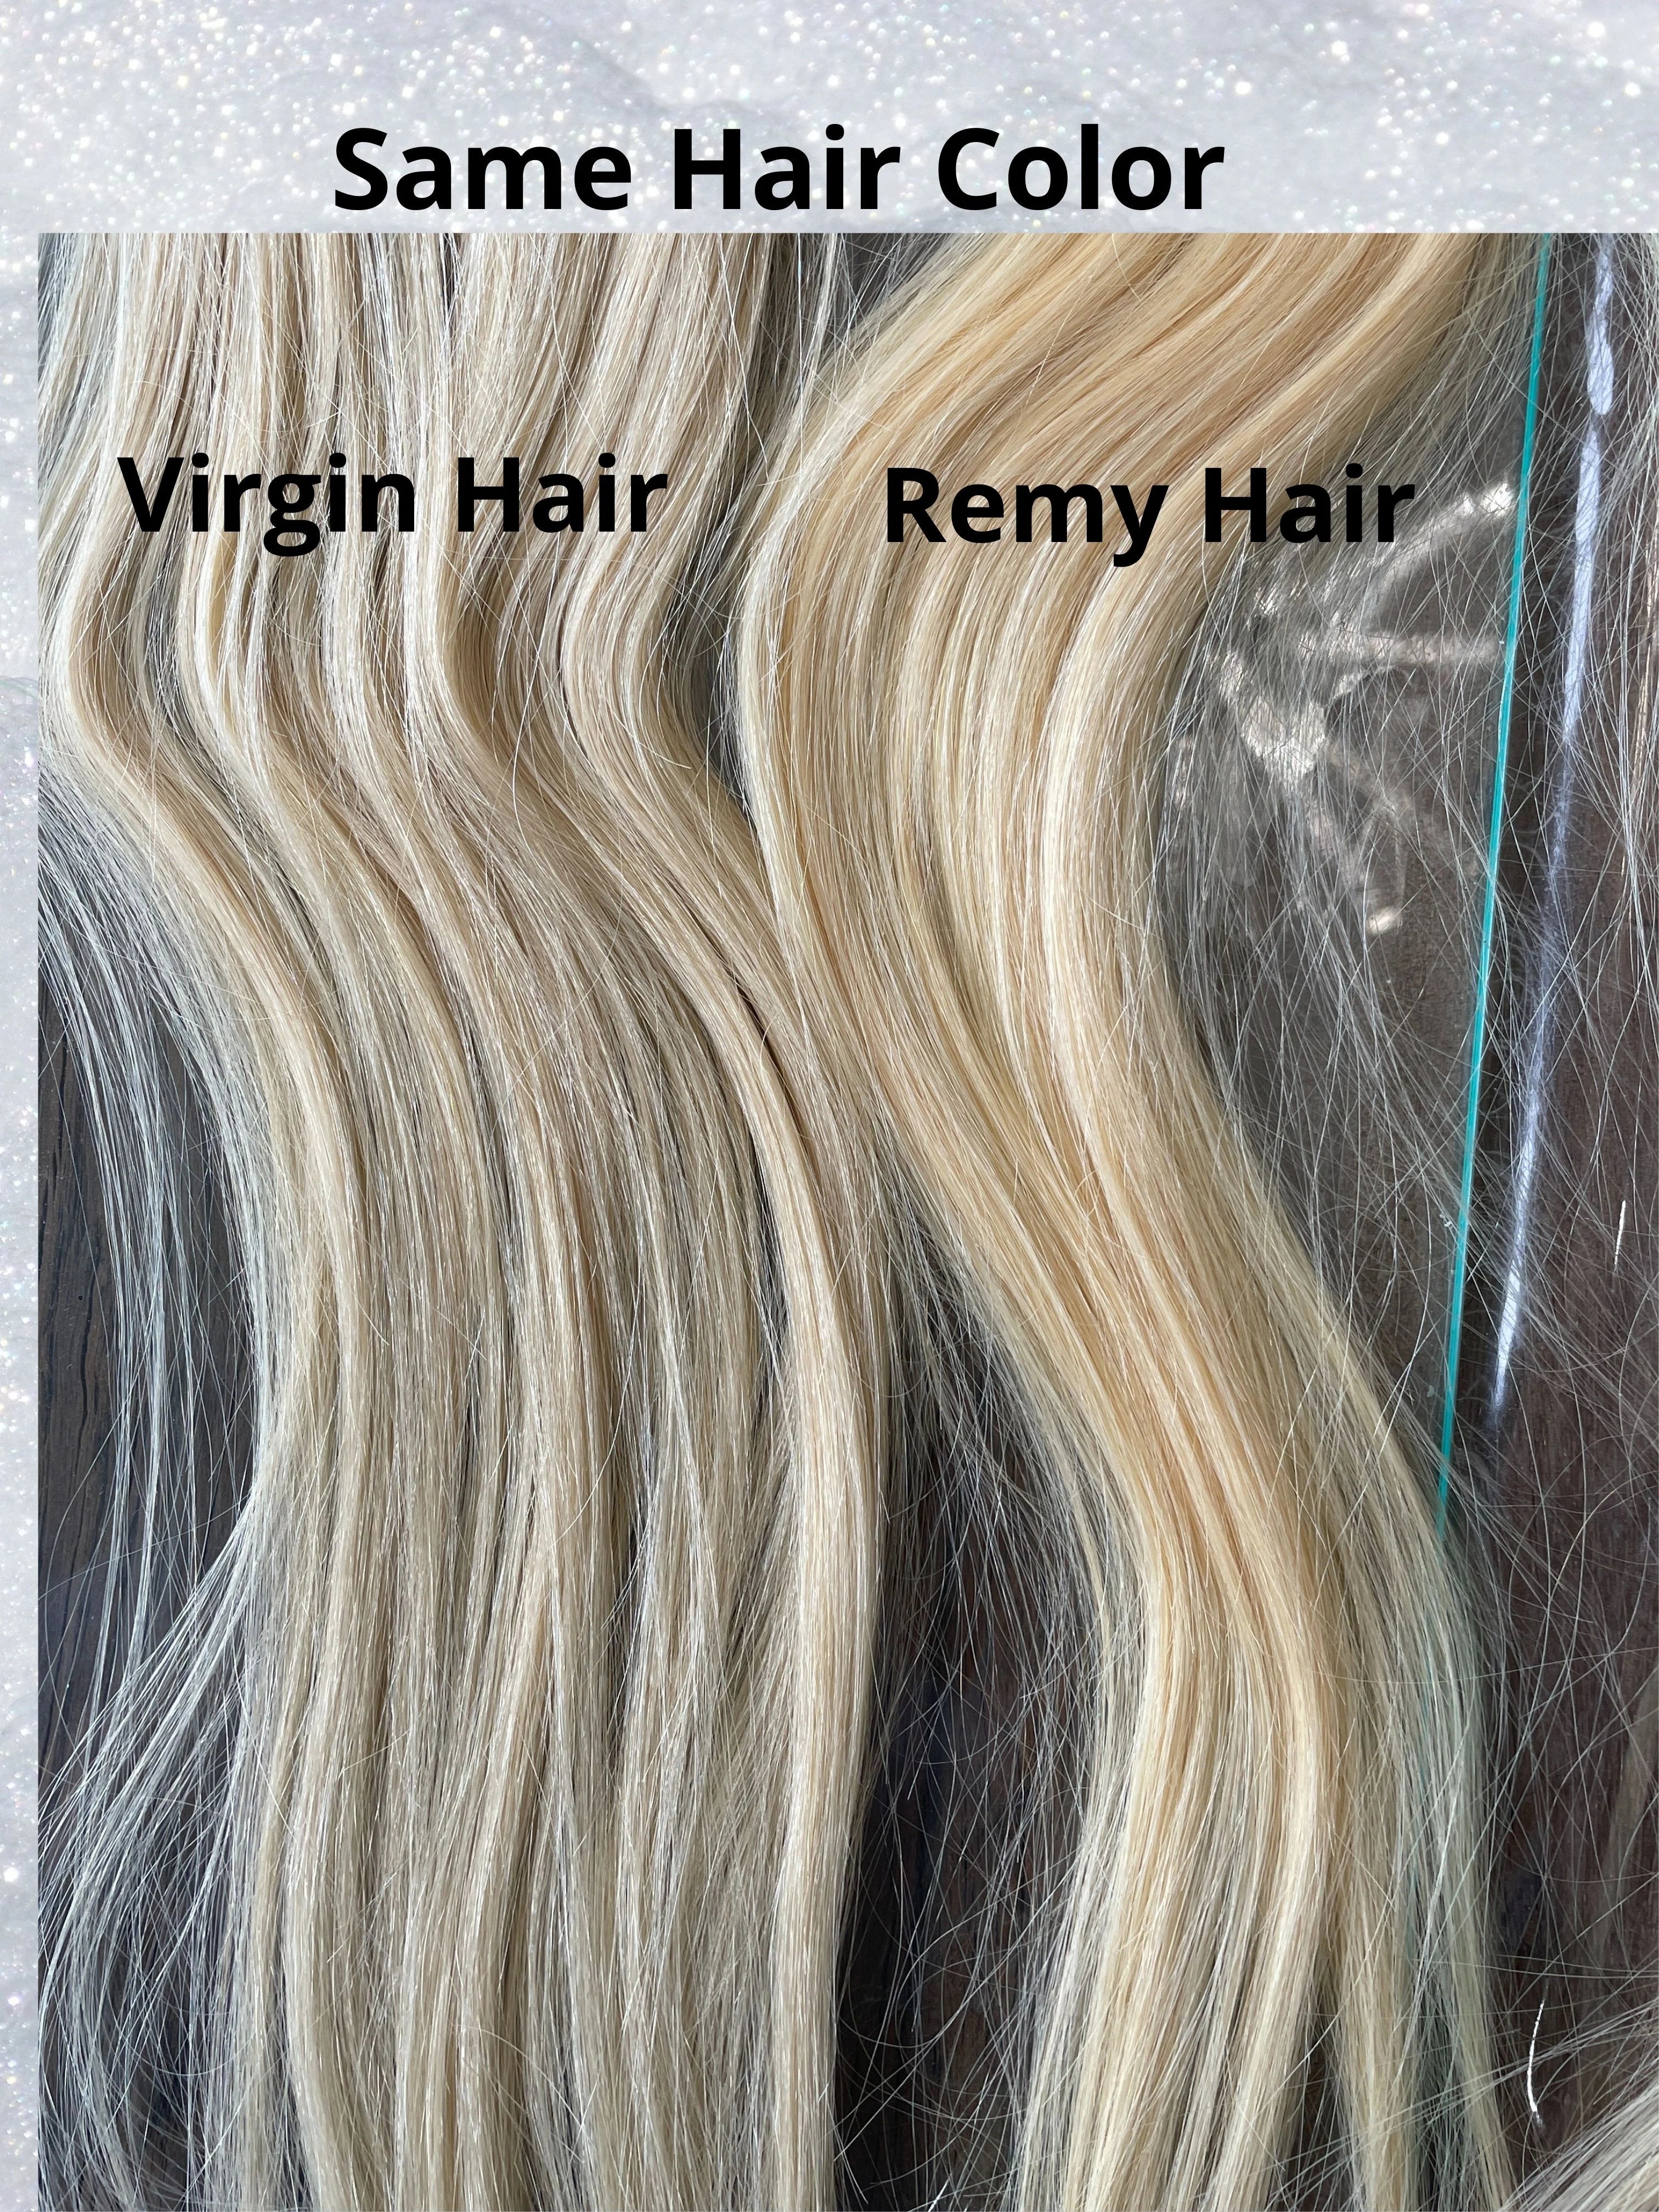 The difference between remy vs. virgin hair